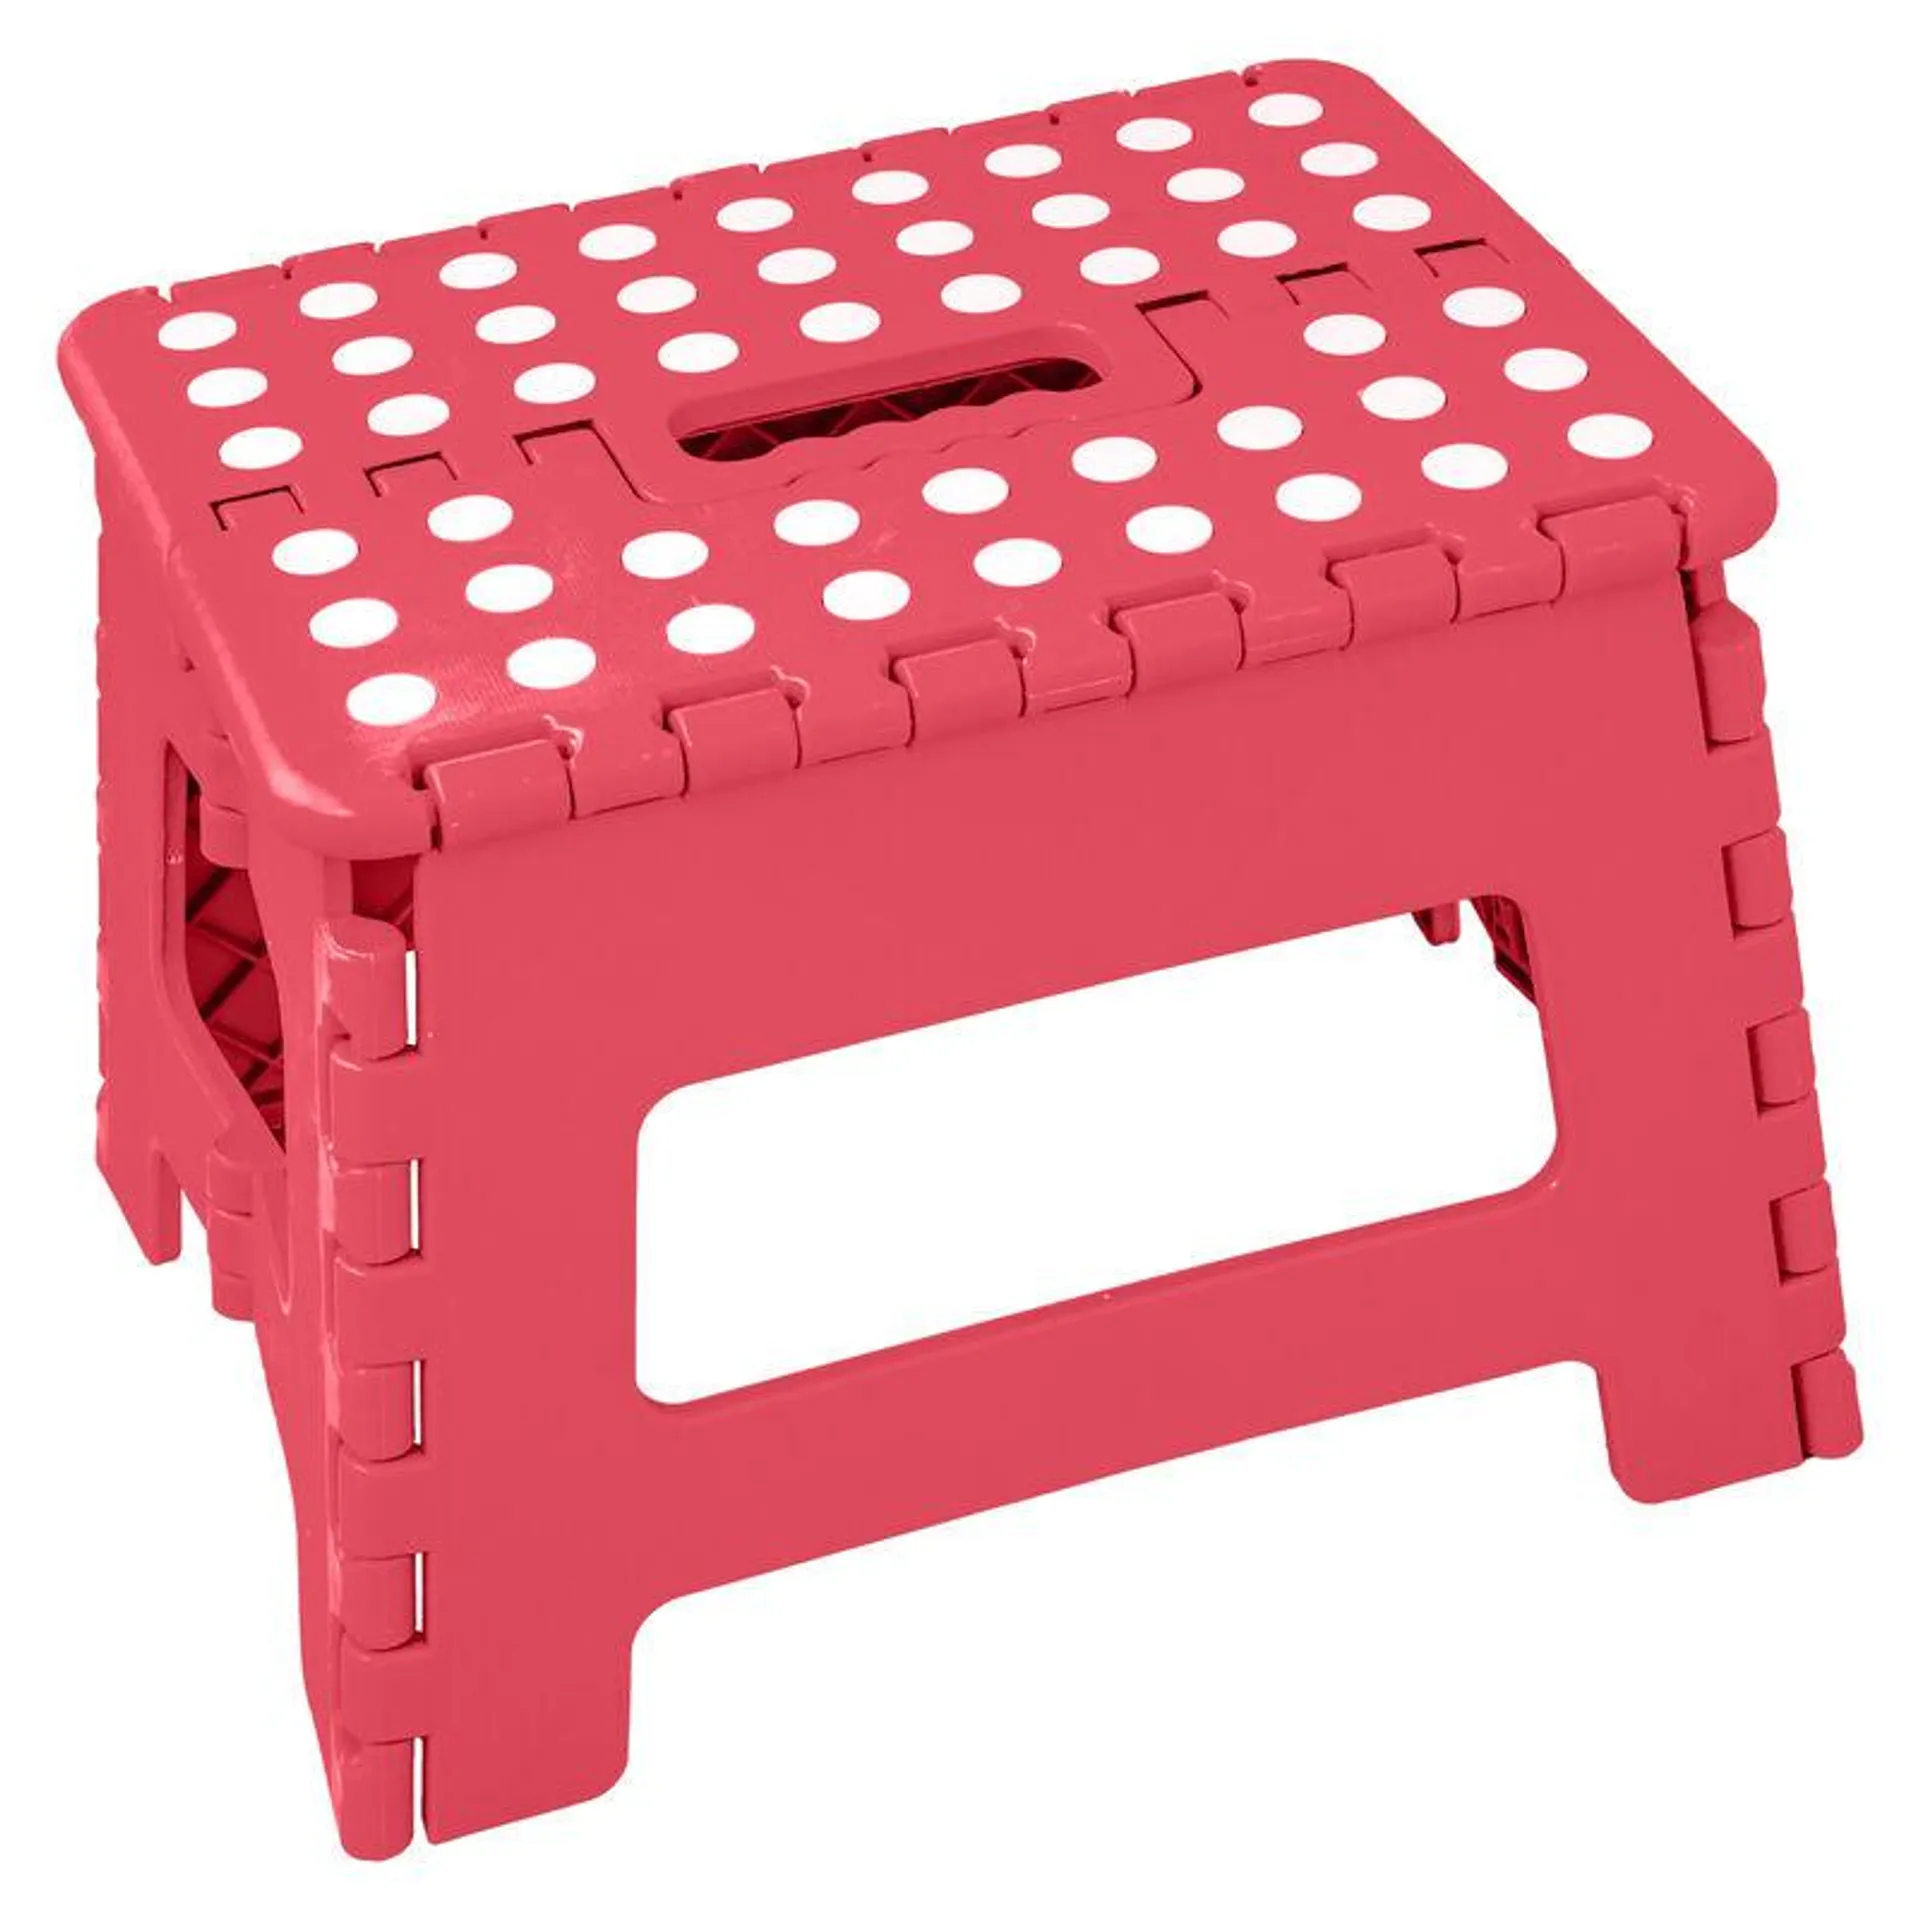 9 inch Foldable Space Saving Step Stool in Red